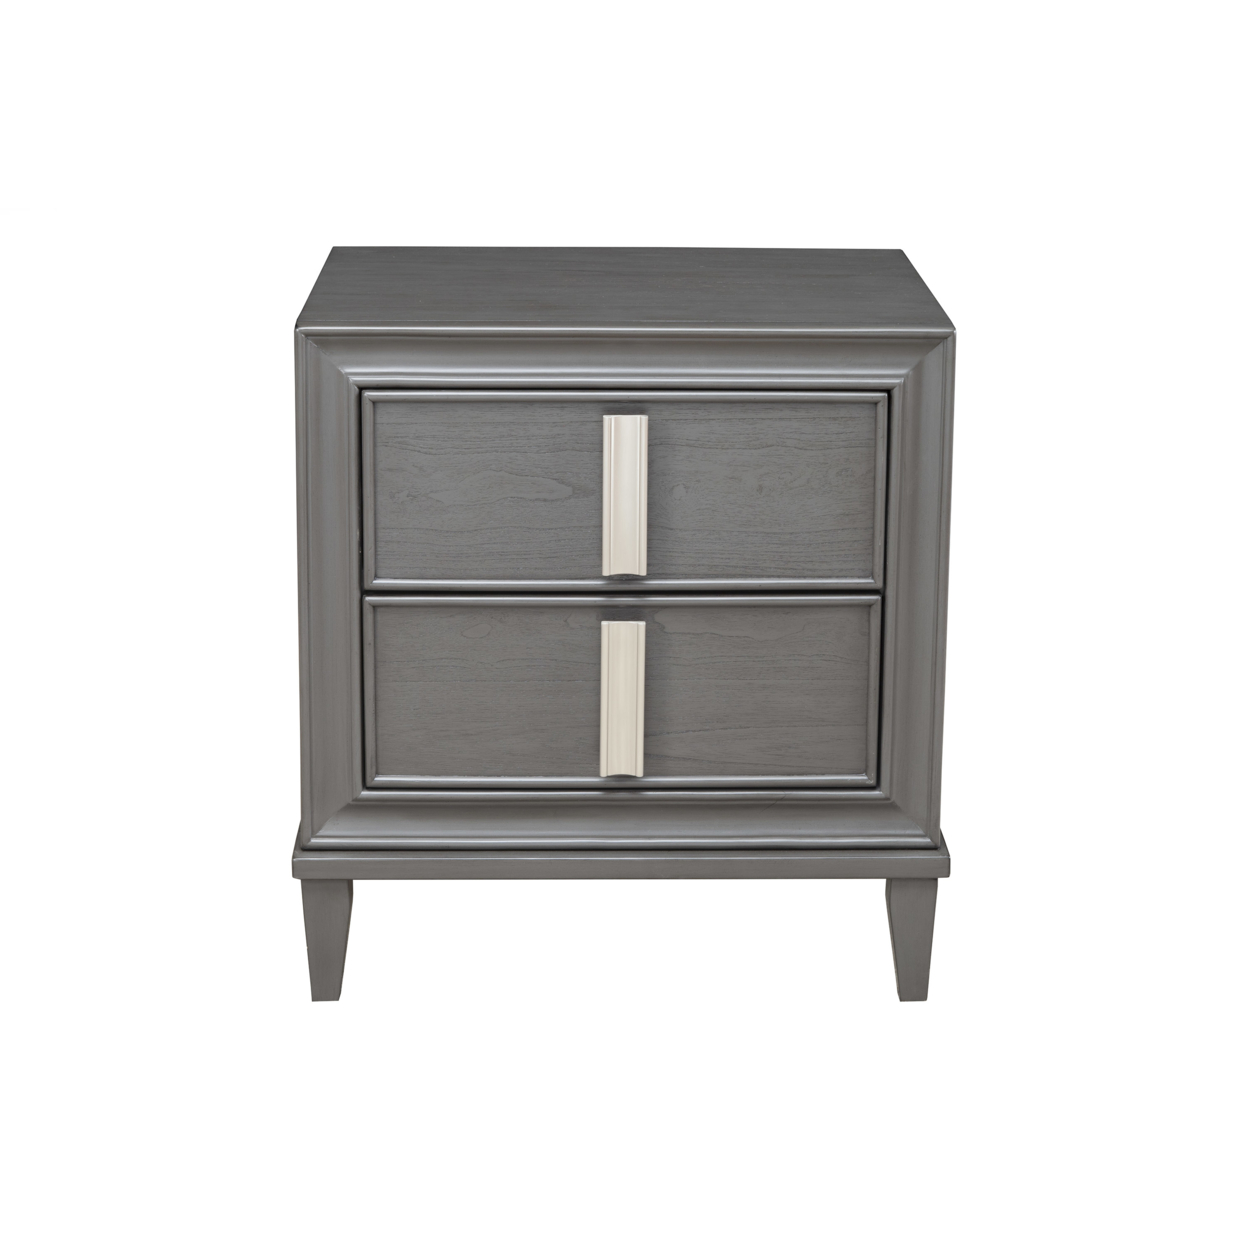 Wooden Nightstand With Two Drawers And Tapered Legs, Gray And White- Saltoro Sherpi